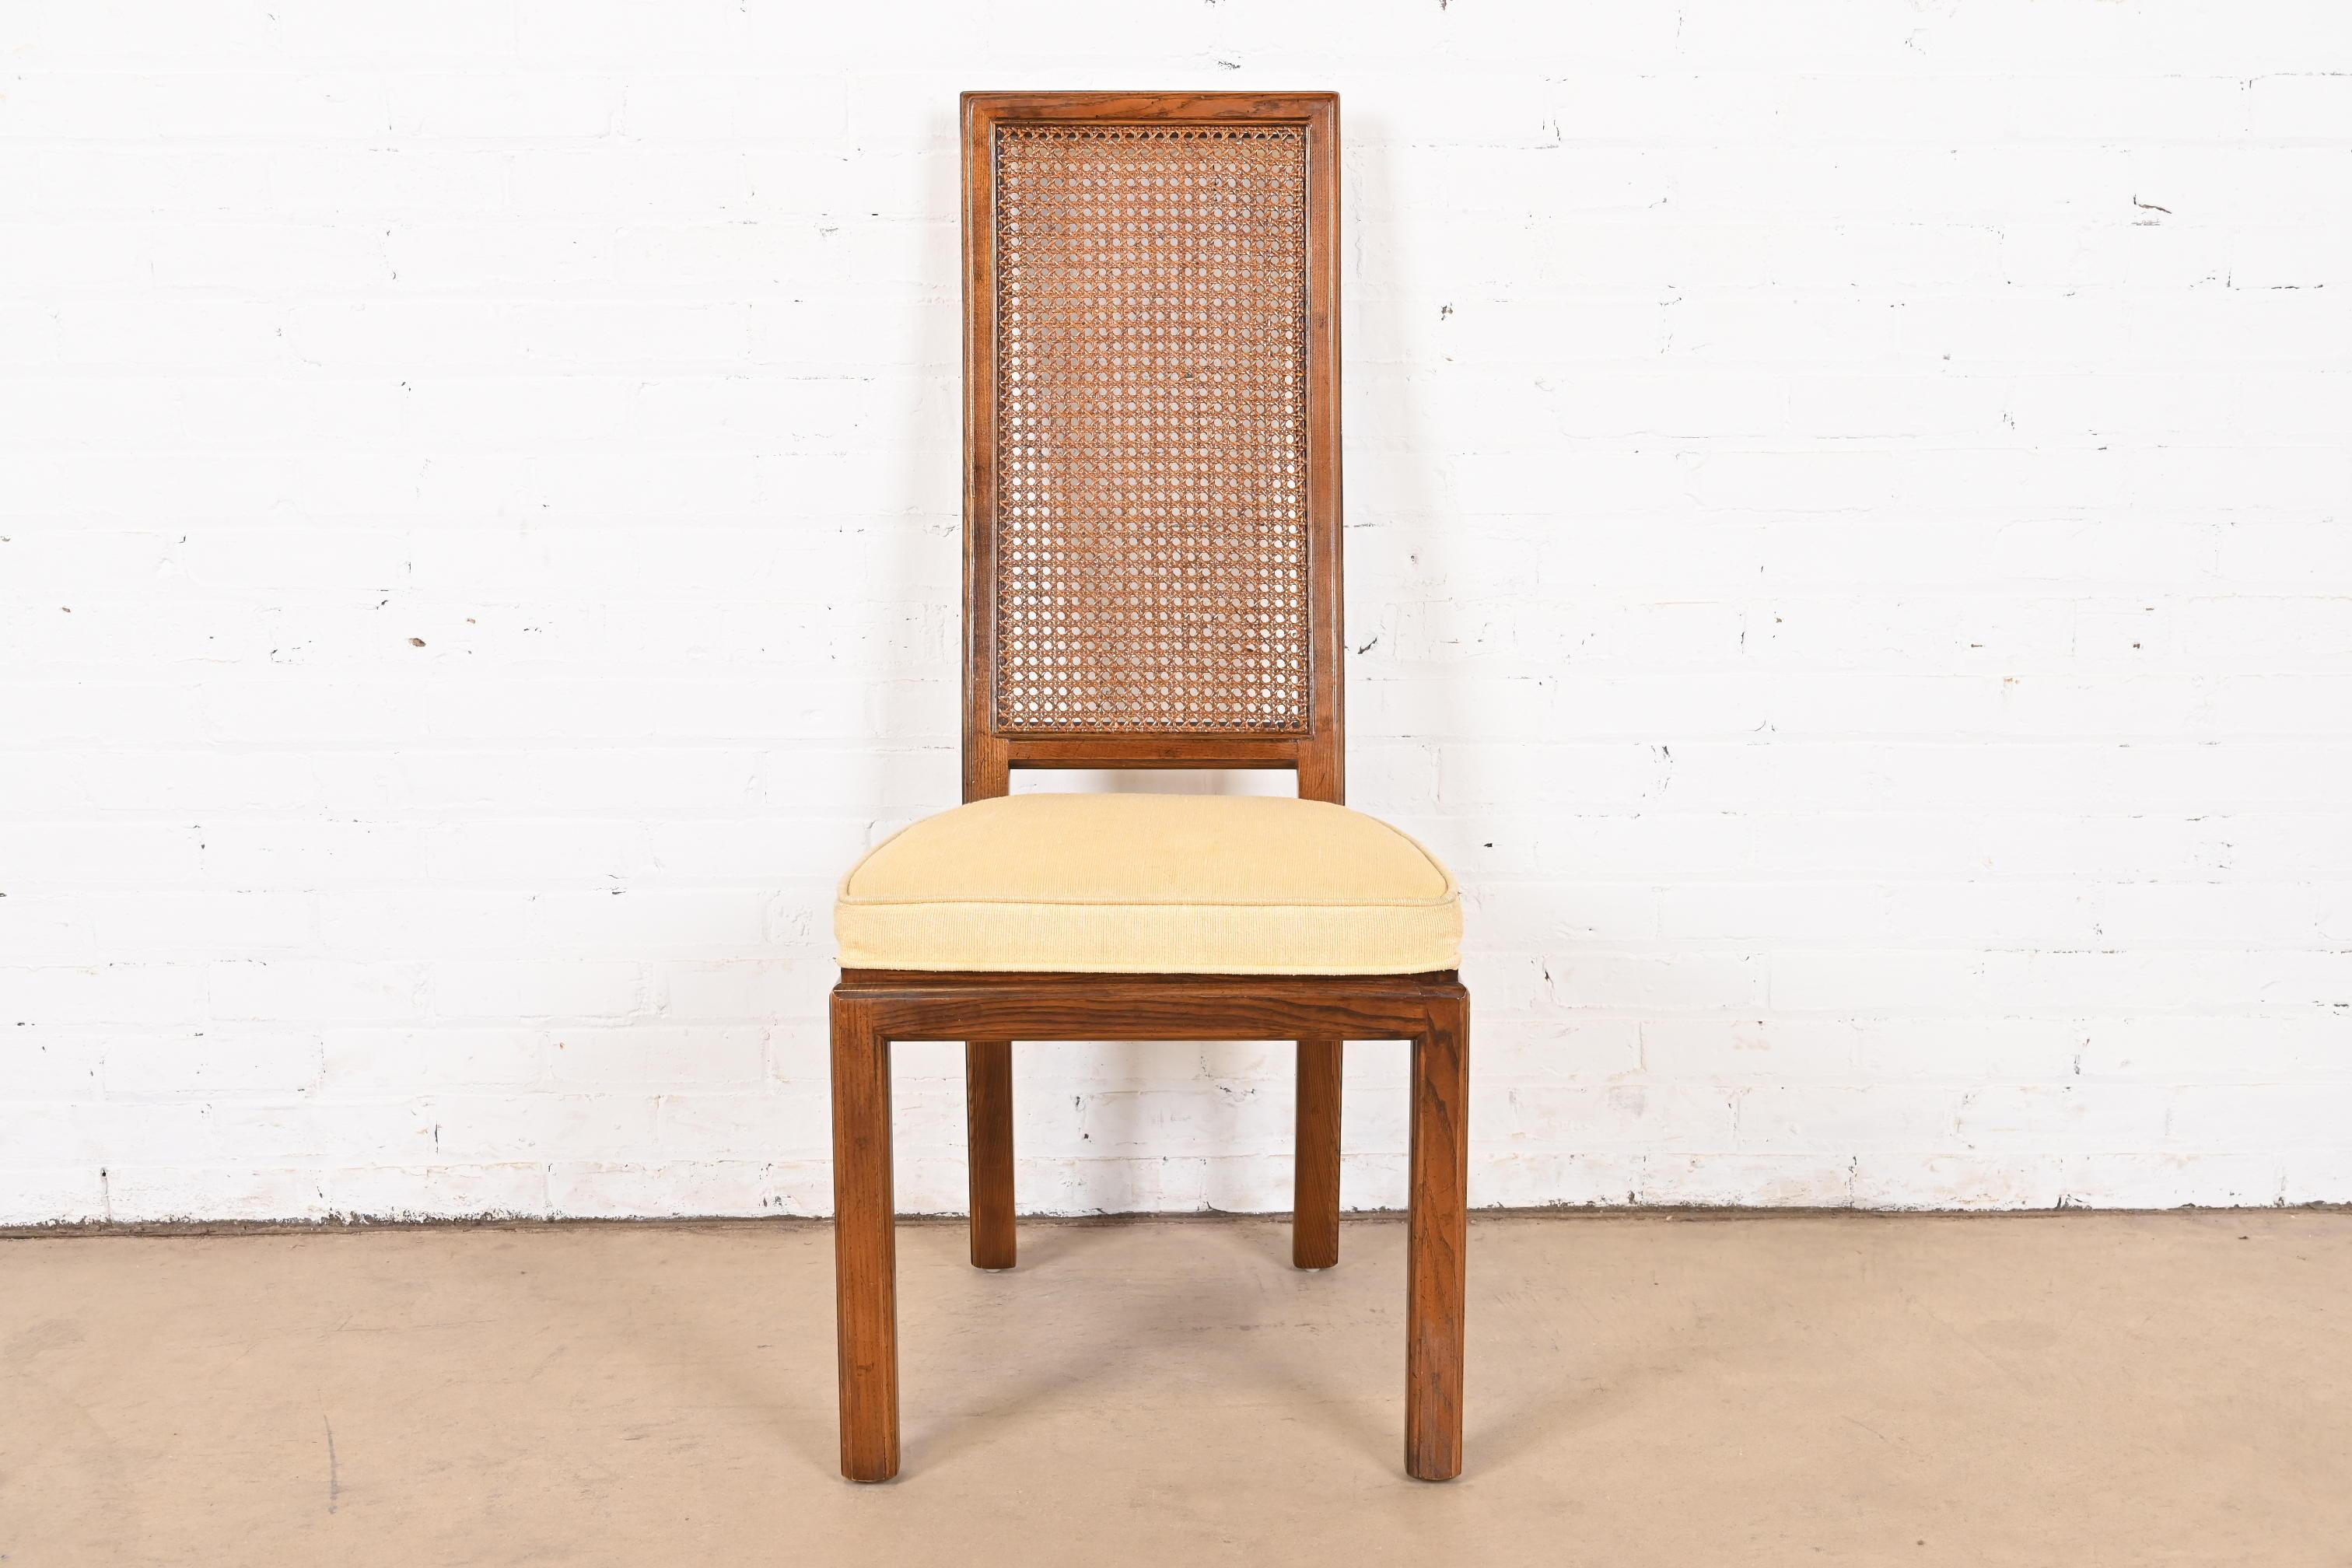 American Henredon Mid-Century Modern Oak and Cane High Back Side Chair, Circa 1970s For Sale